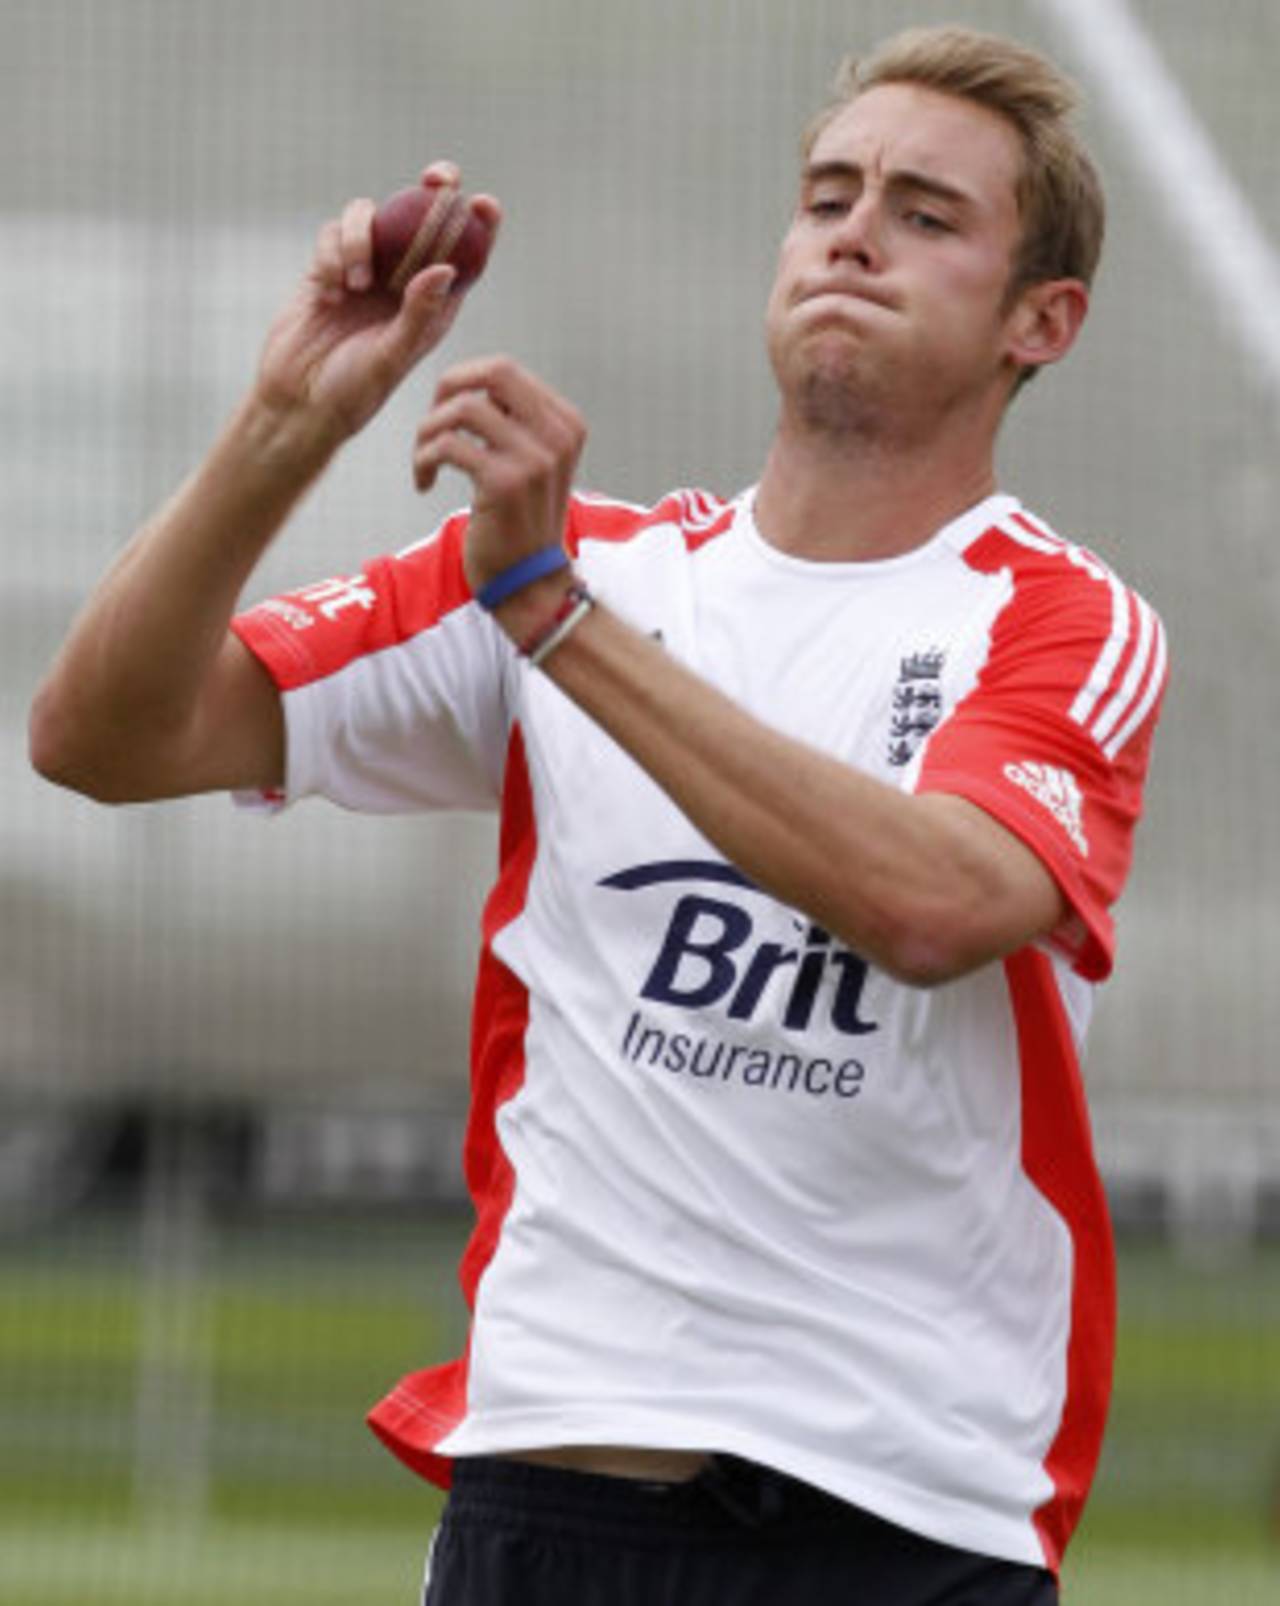 Stuart Broad bowls in the nets, Lord's, July 20, 2011